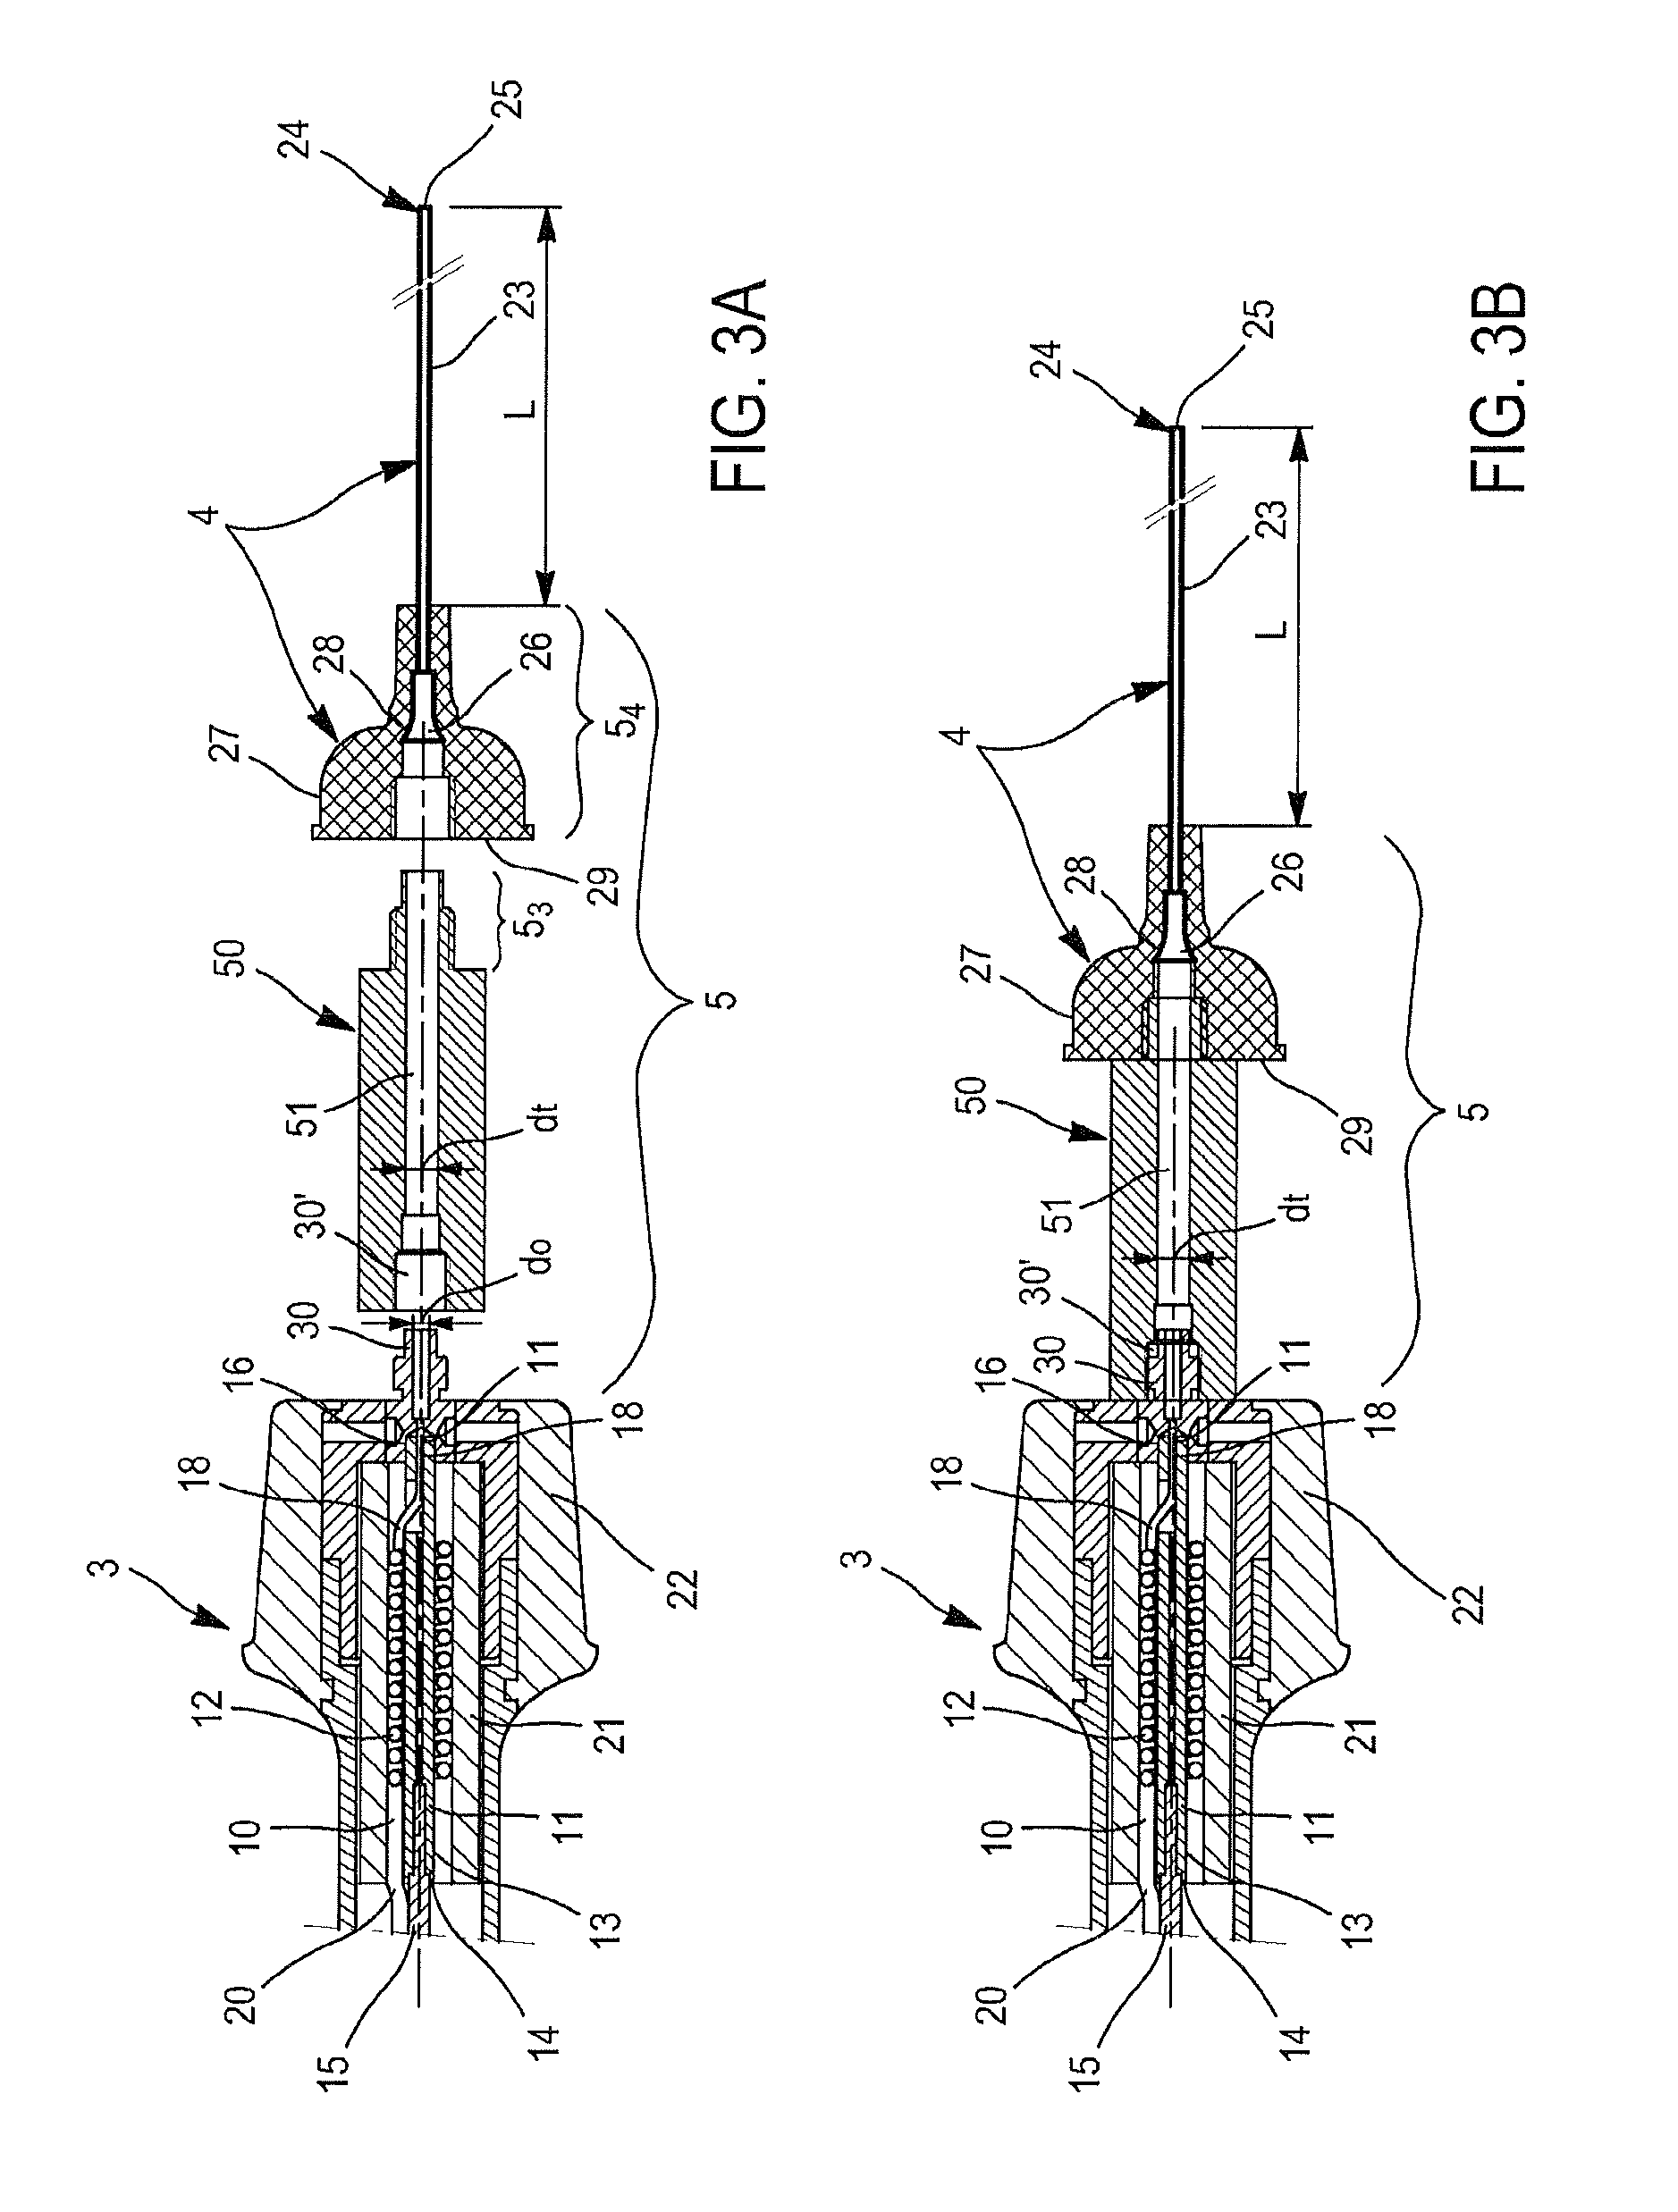 Device and Method for Injecting Pulsed Steam Into a Human or Animal Vessel E.G. a Vein